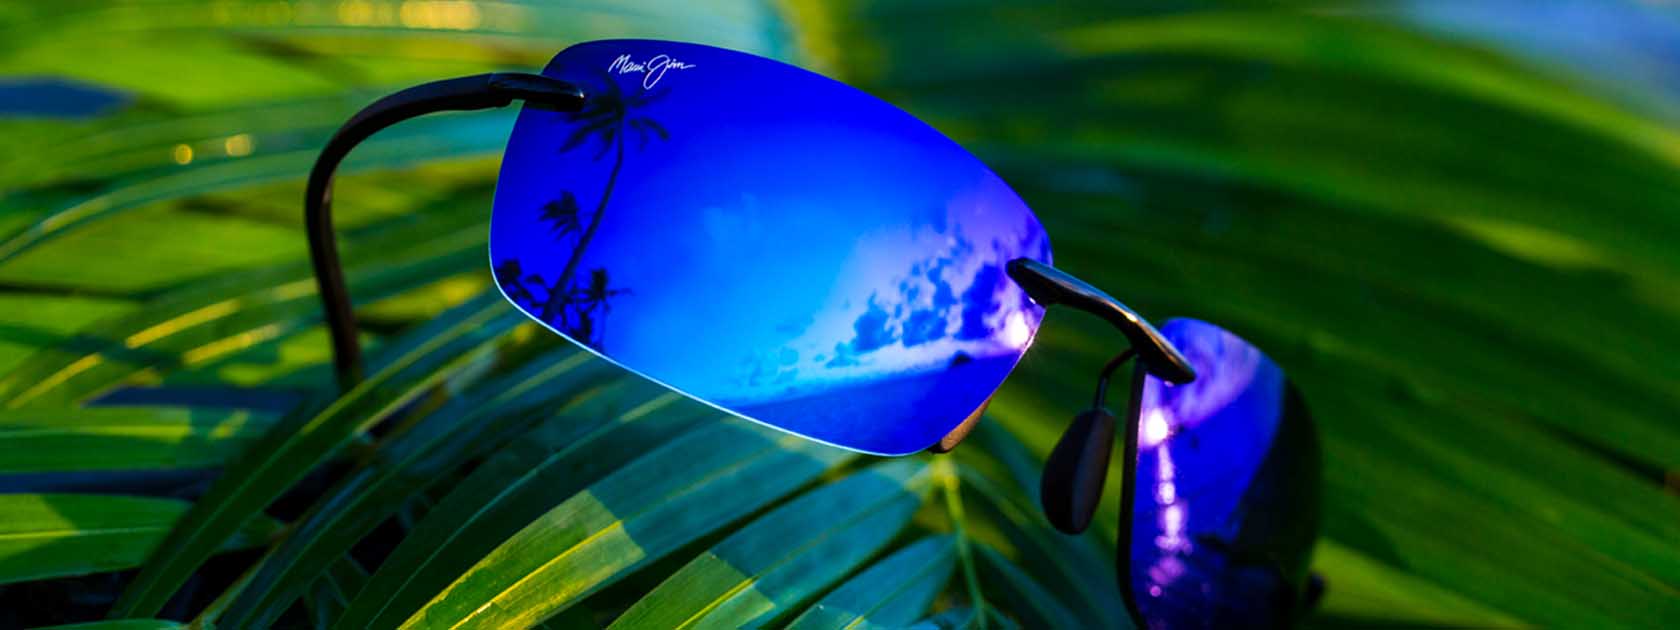 frameless sunglasses with blue lenses displayed on palm leaves